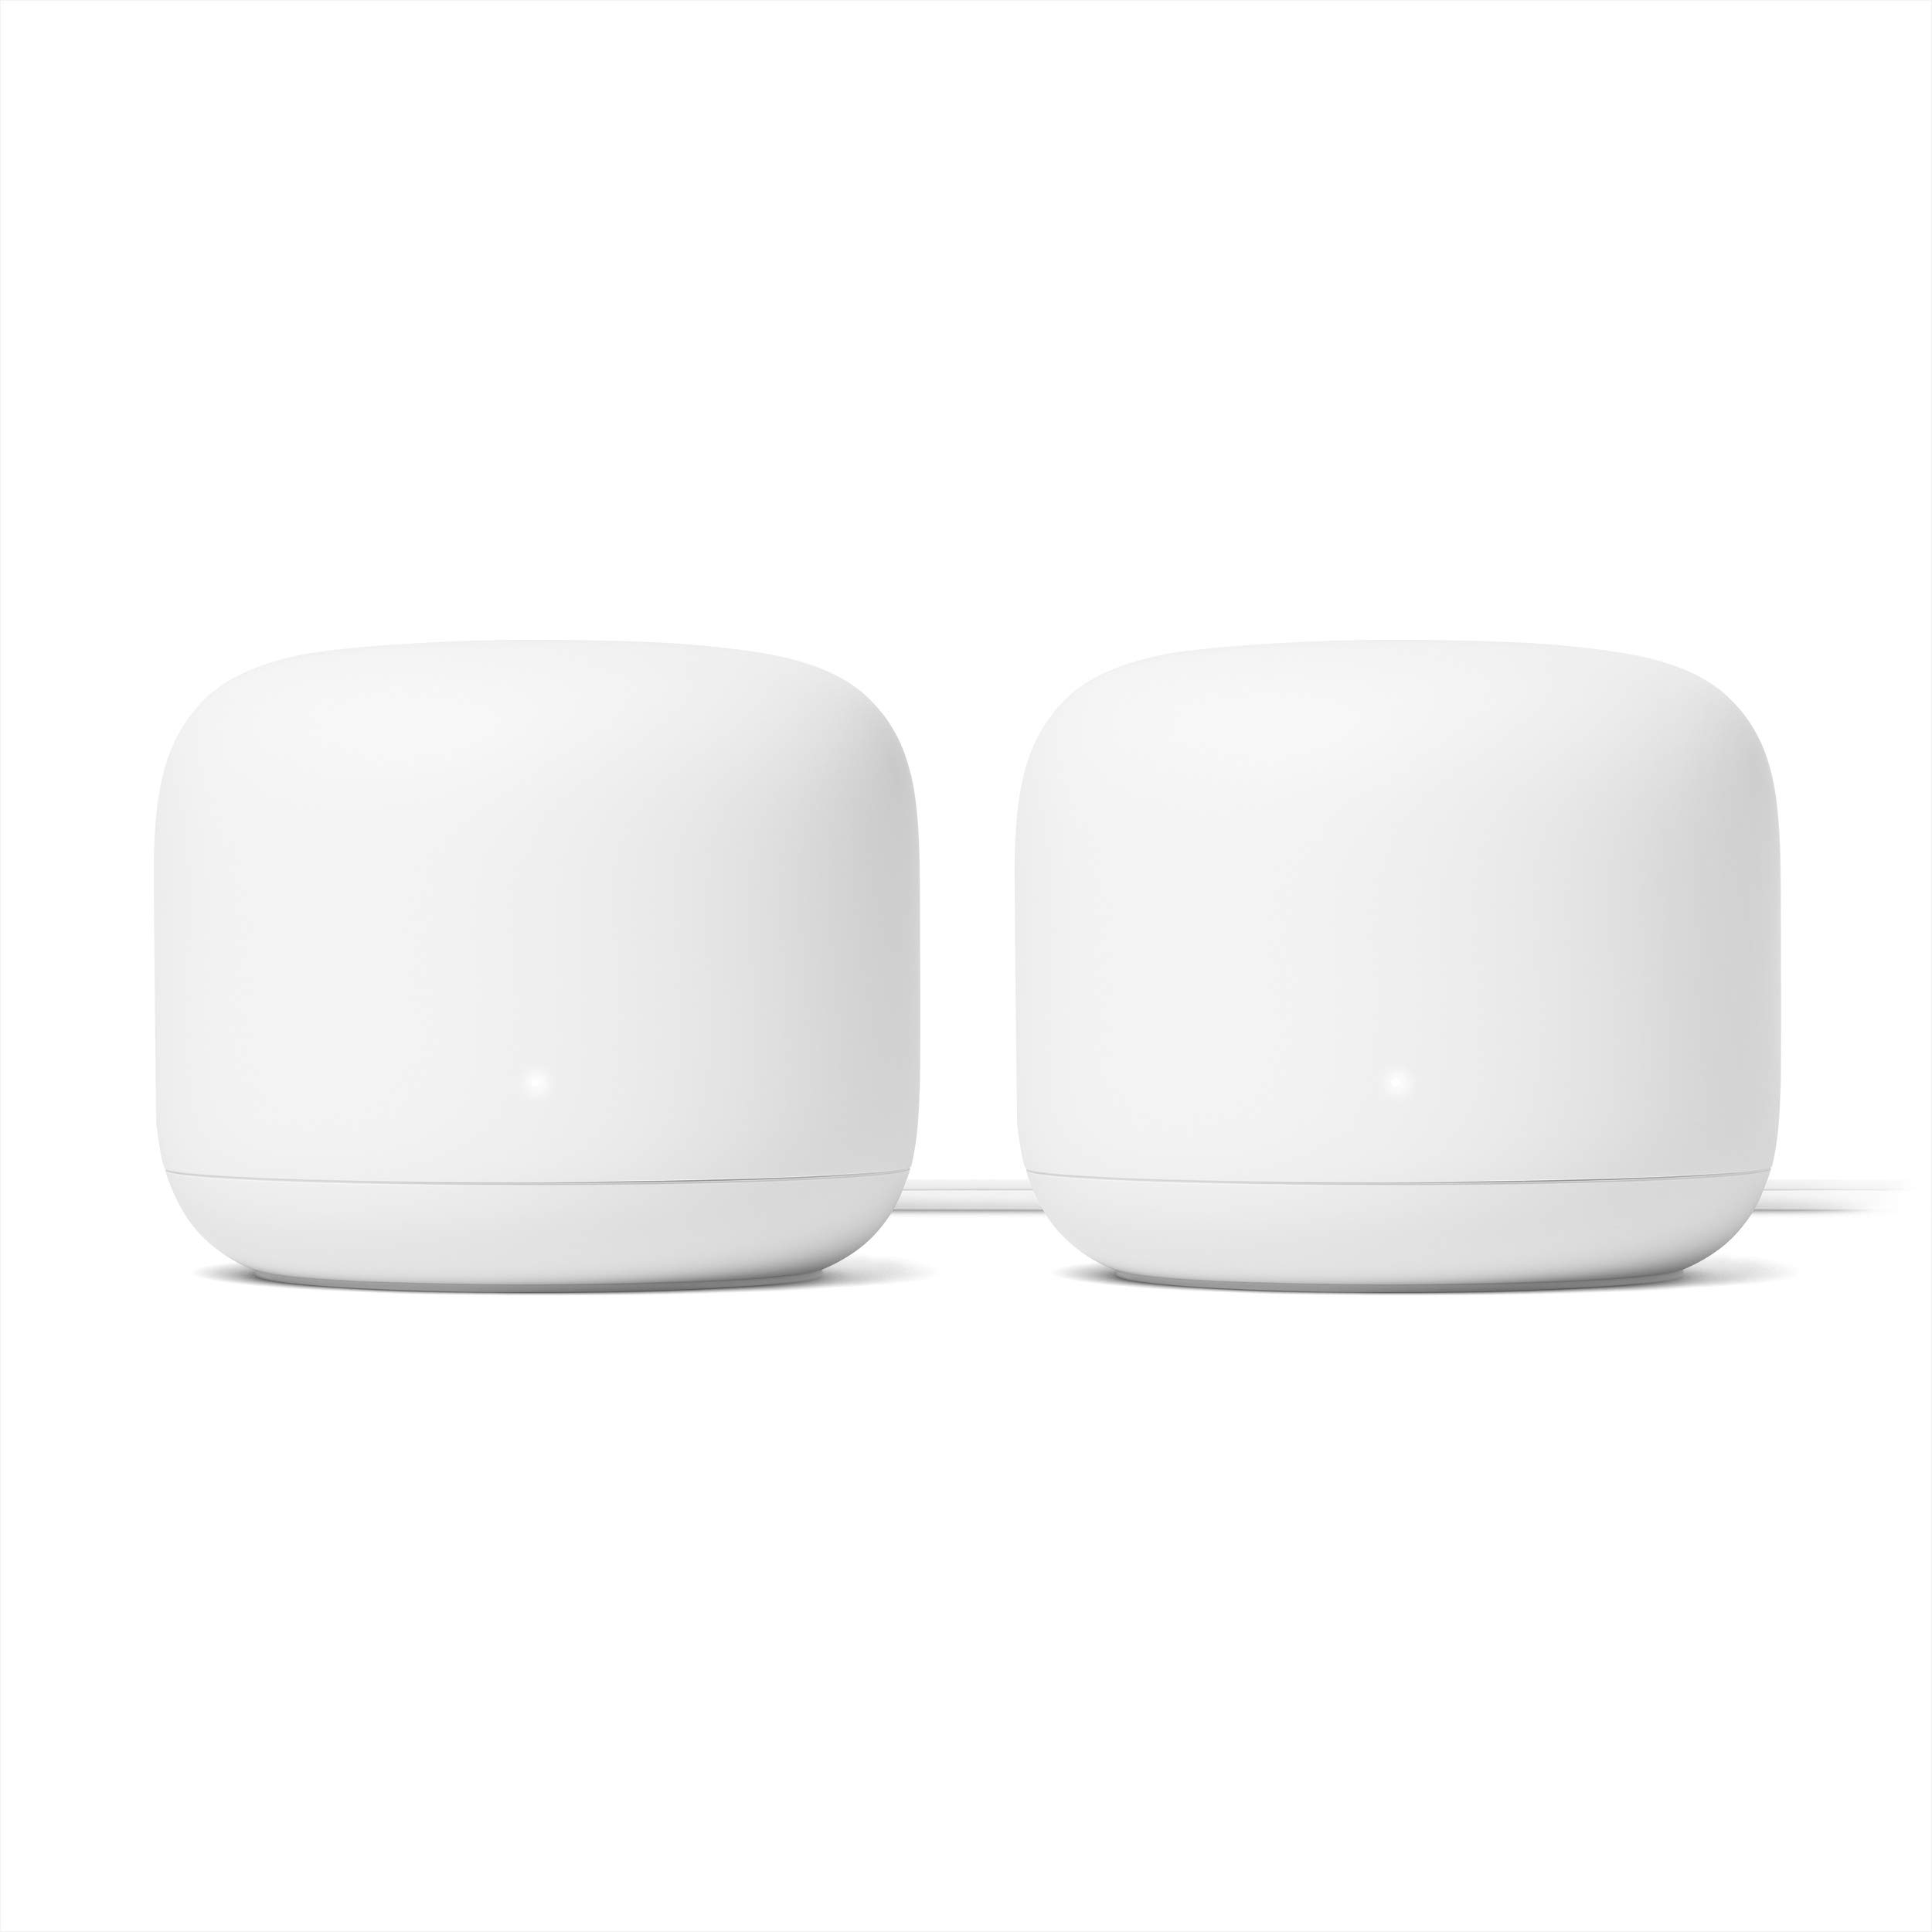 Google Nest Wifi Mesh Router - 2 Pack $123 + Free Shipping